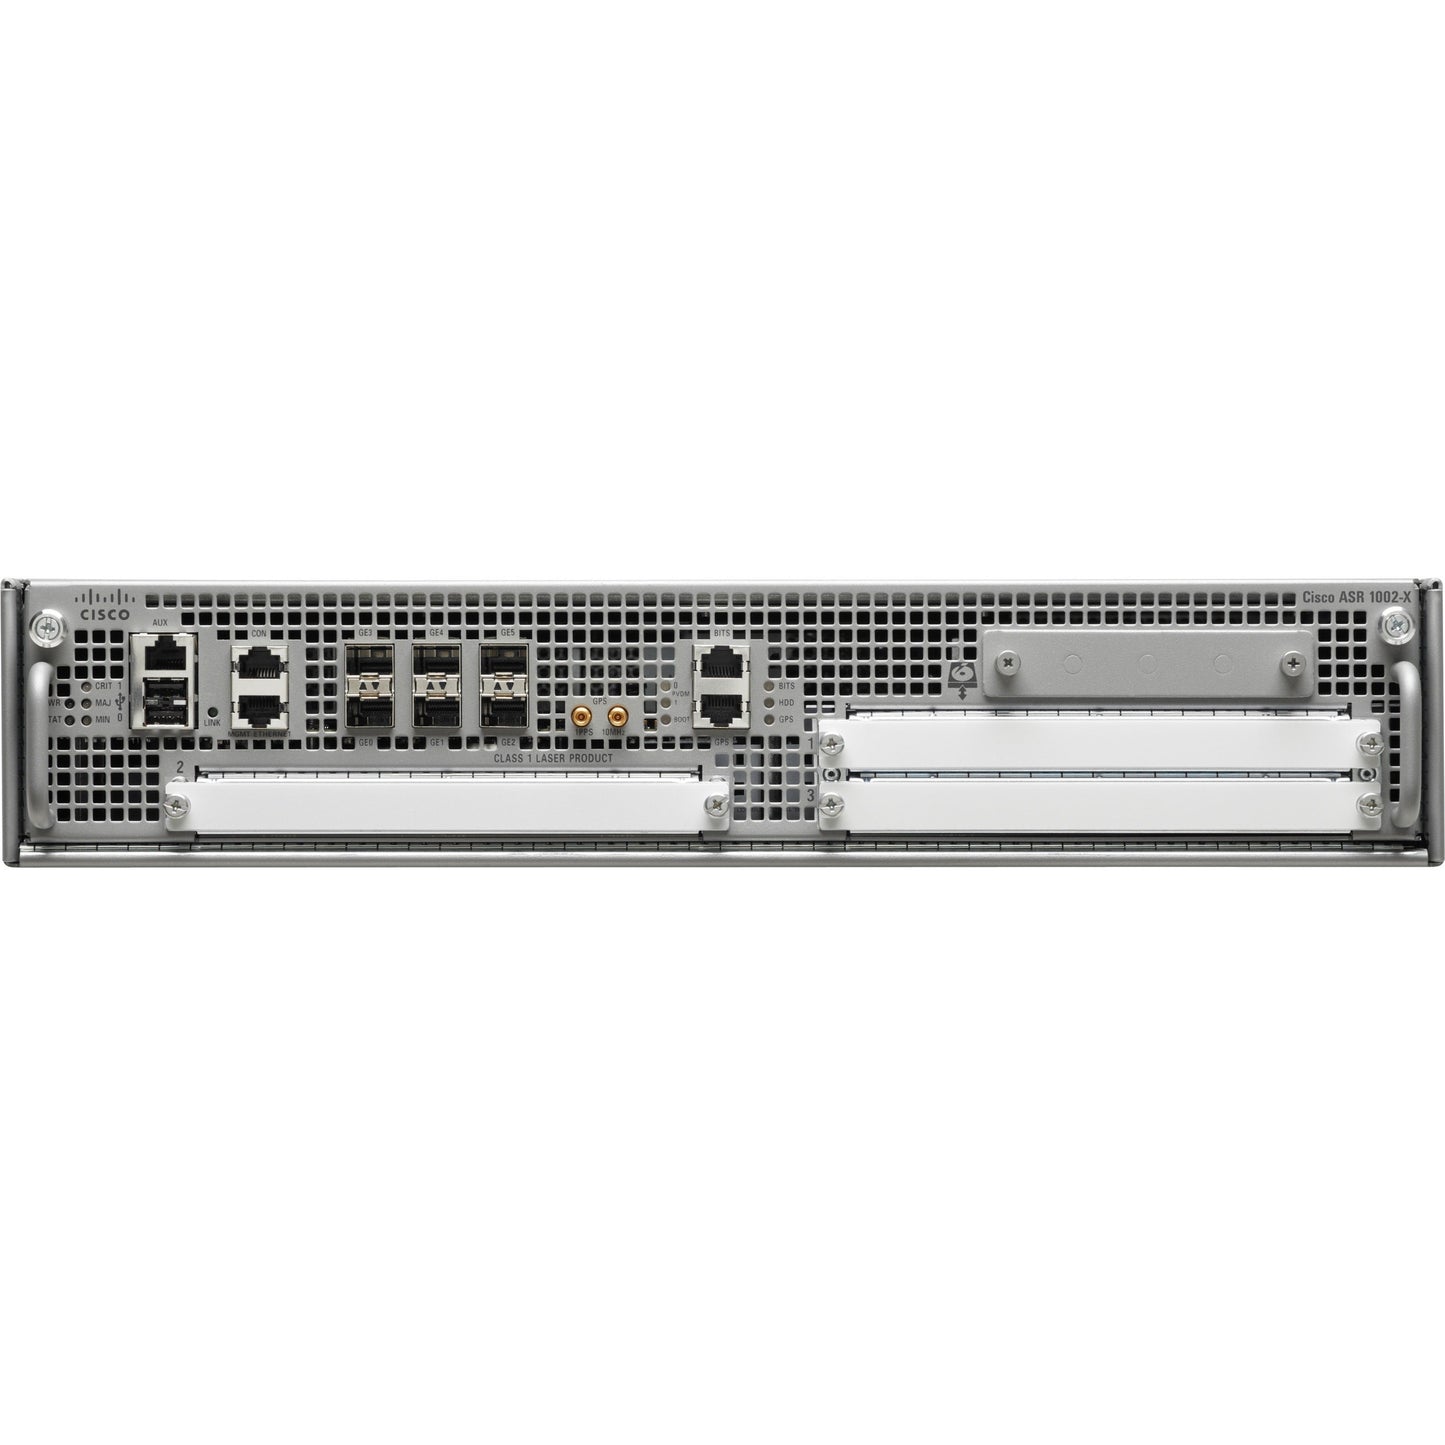 Cisco ASR 1002-X Router Chassis